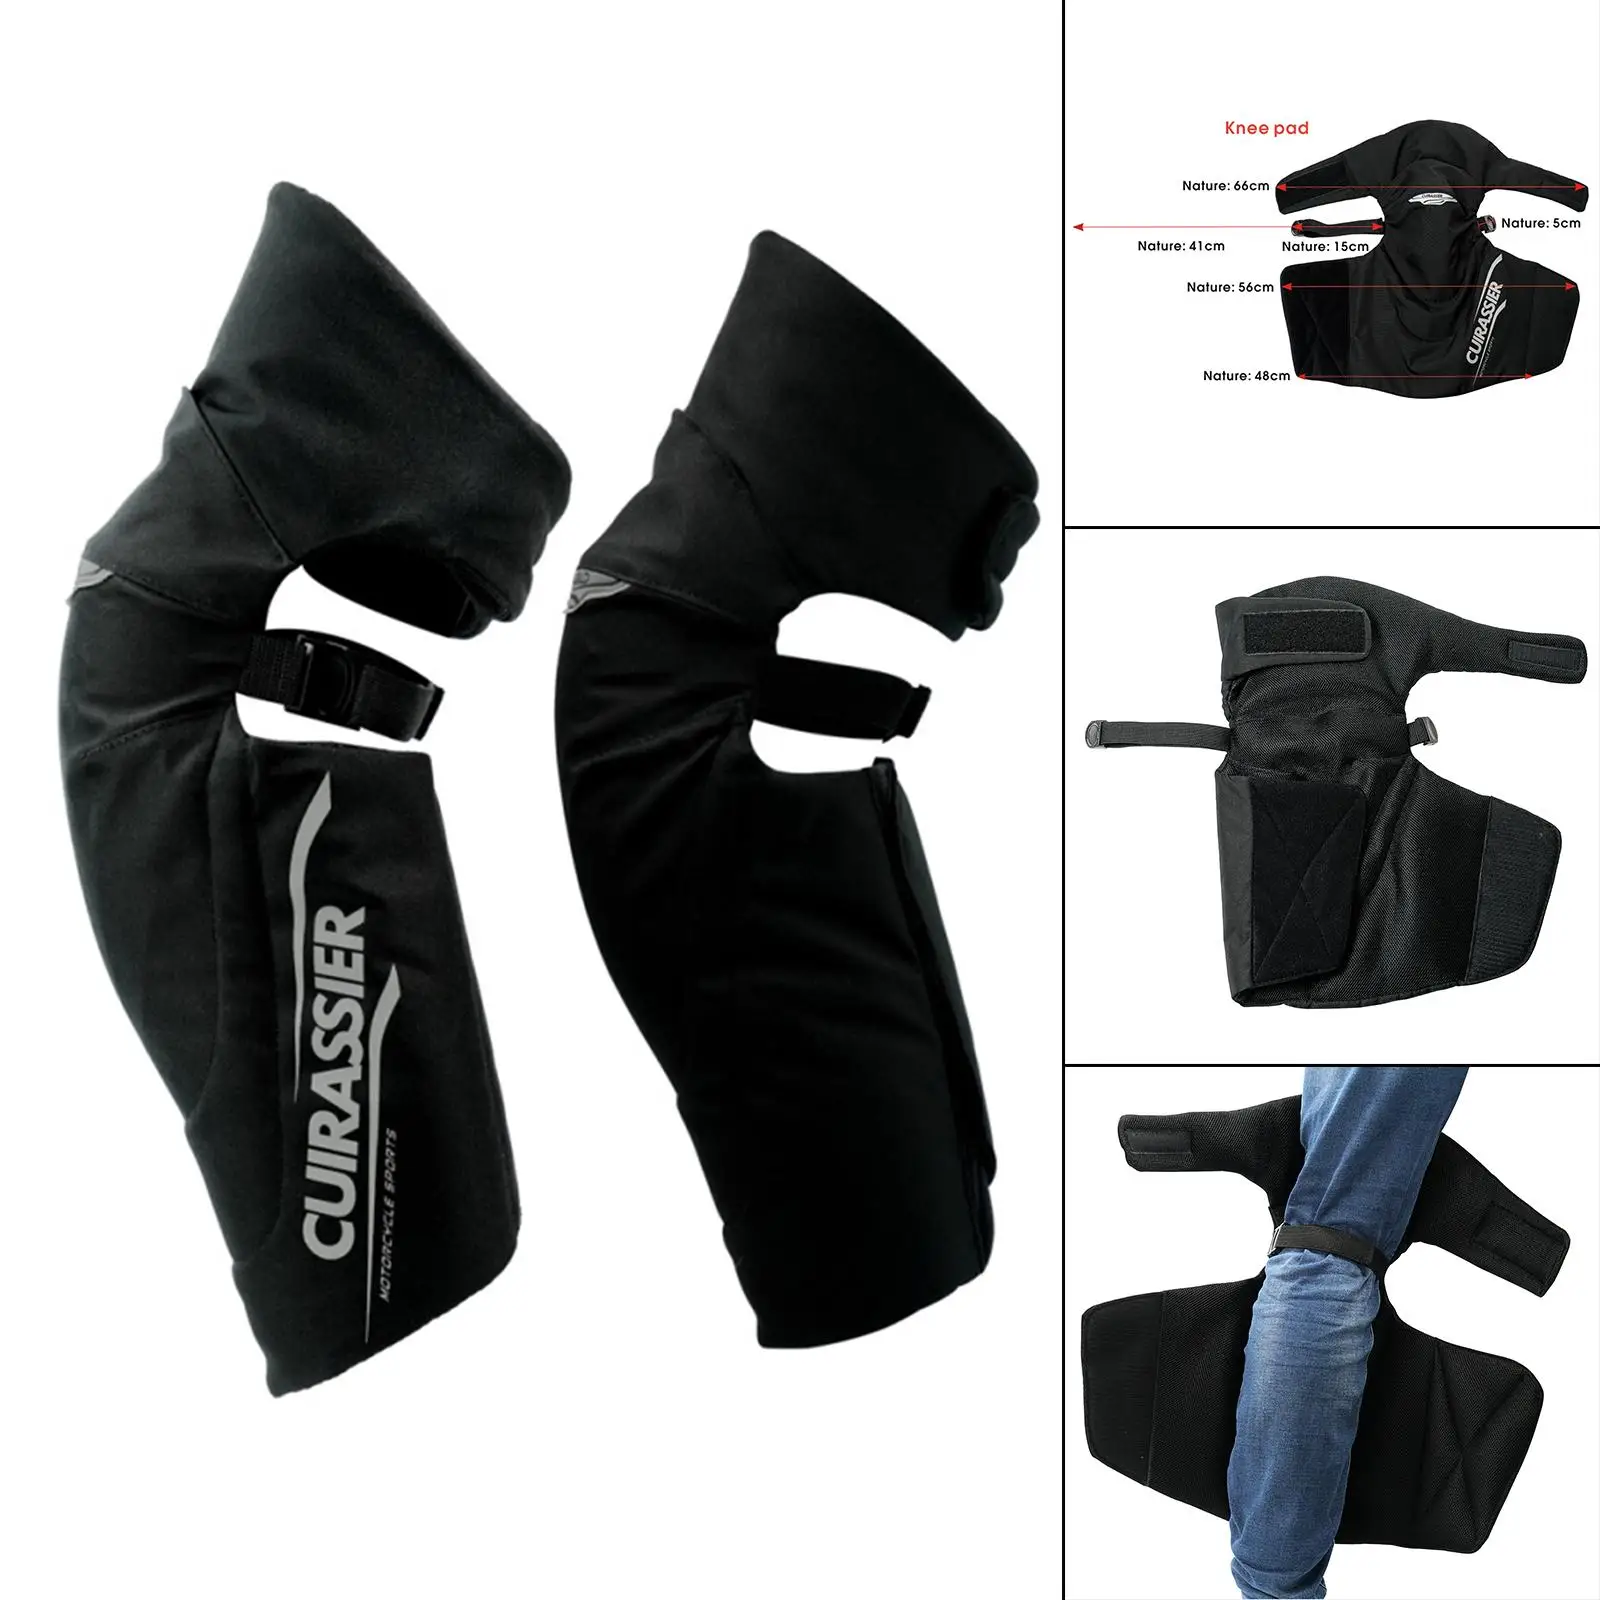 Motorcycle Knee Pads Guards Leggings Covers Fit for Cycling Skiing Winter